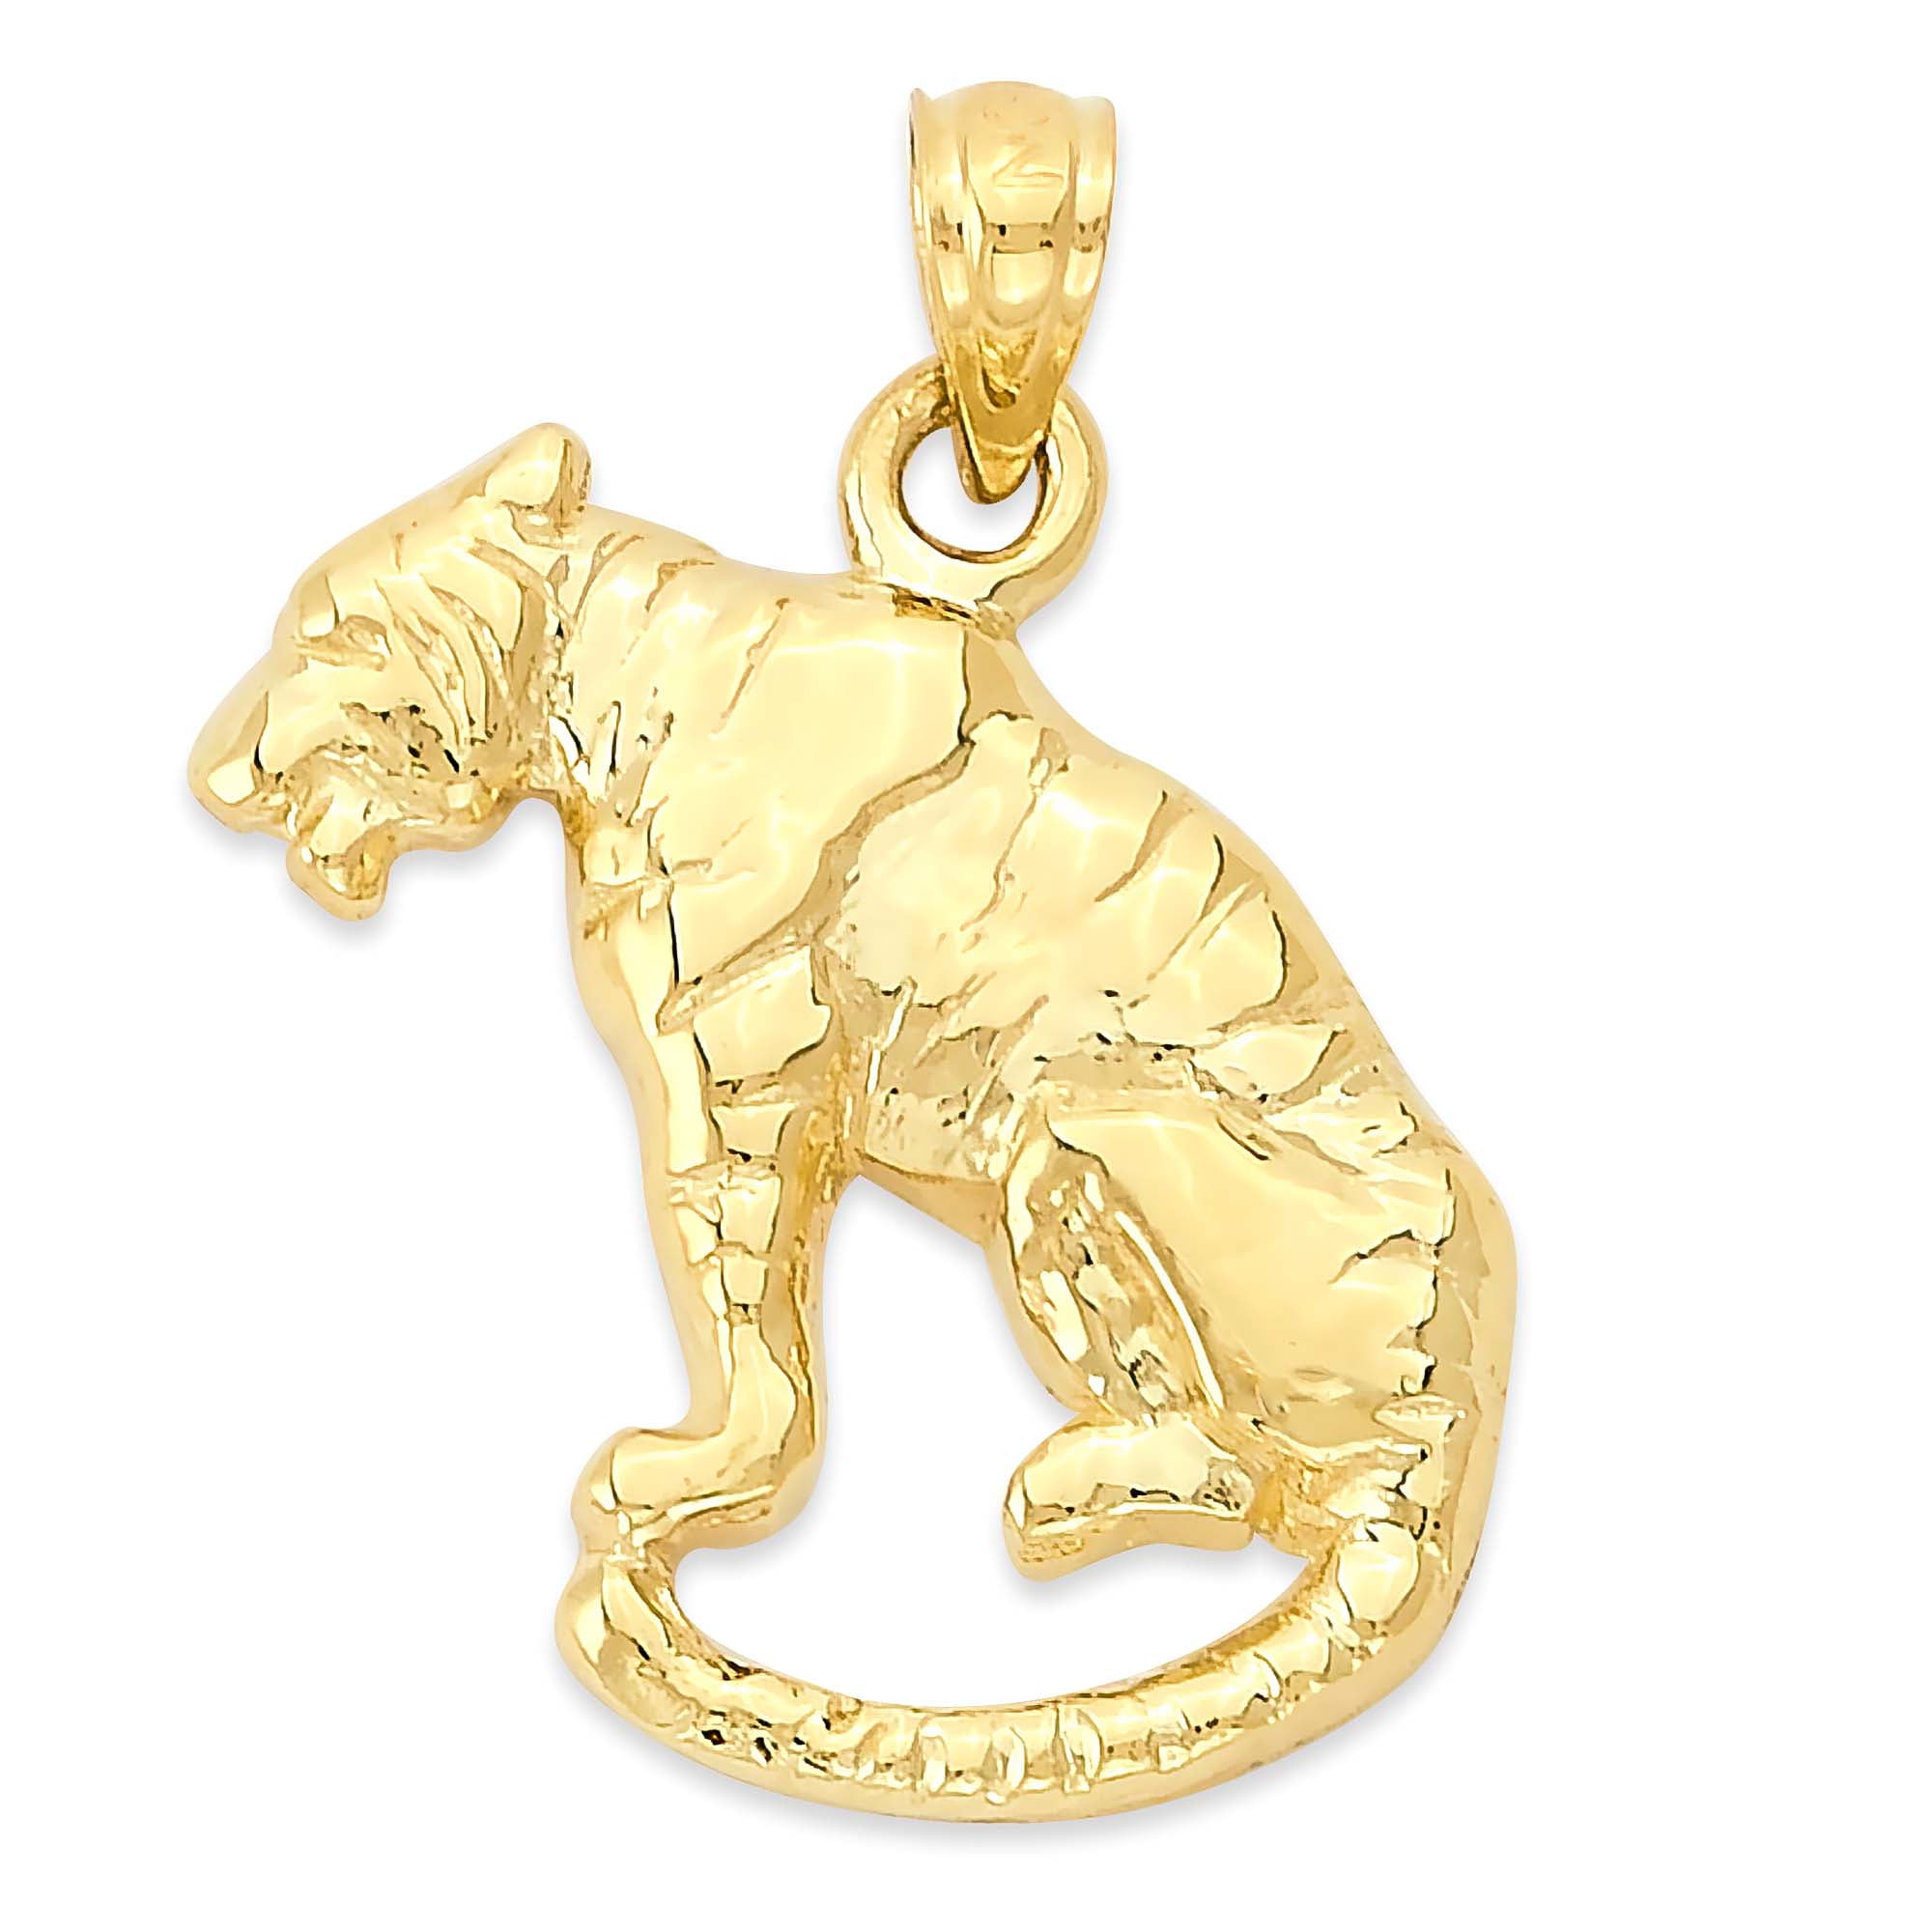 10k Gold Tiger Pendant, Chinese Zodiac Year of the Tiger Jewelry, Her Jewelry, Birthday for Her Walmart.com